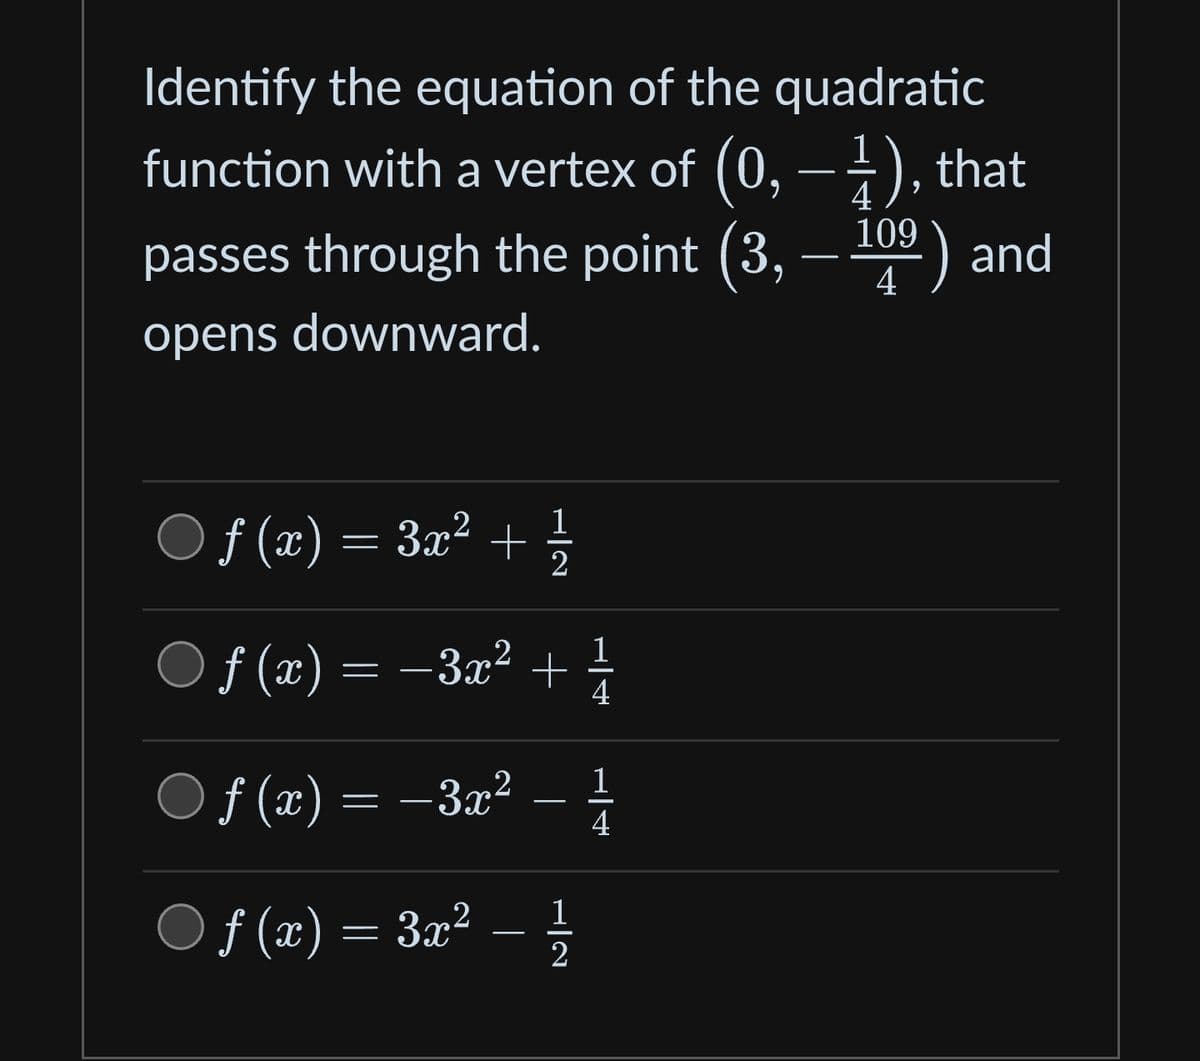 Identify the equation of the quadratic
function with a vertex of (0, − 1), that
passes through the point (3,
4
109
14⁹) and
opens downward.
ƒ (x) = 3x² + 1⁄2
ƒ (x) = −3x² + 1/
4
ƒ (x) = −3x²
ƒf (x) = 3x²
1
H|2
1
4